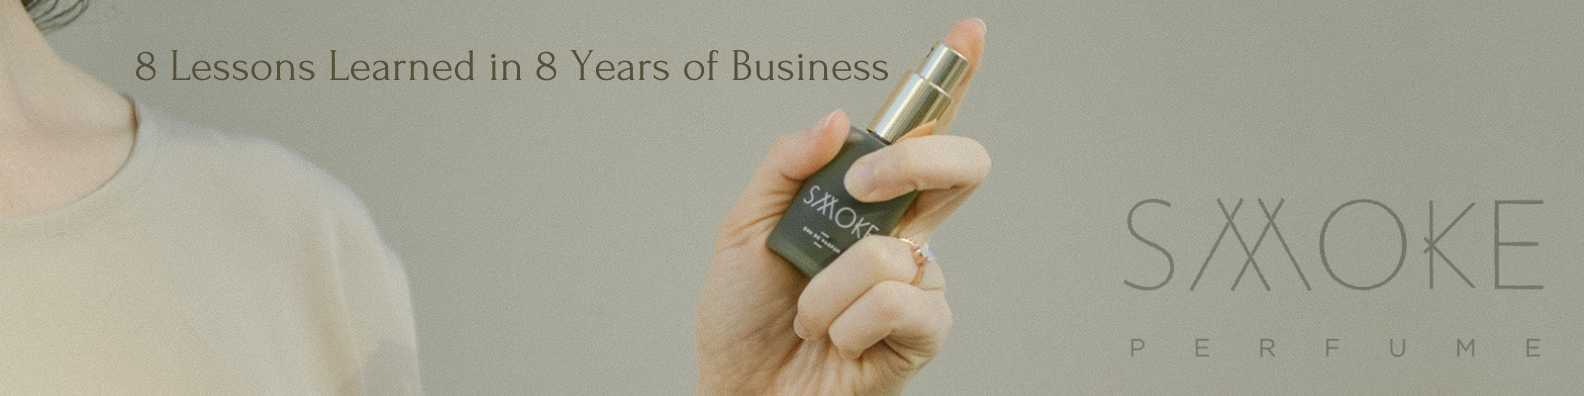 8 Lessons Learned in 8 Years of Business